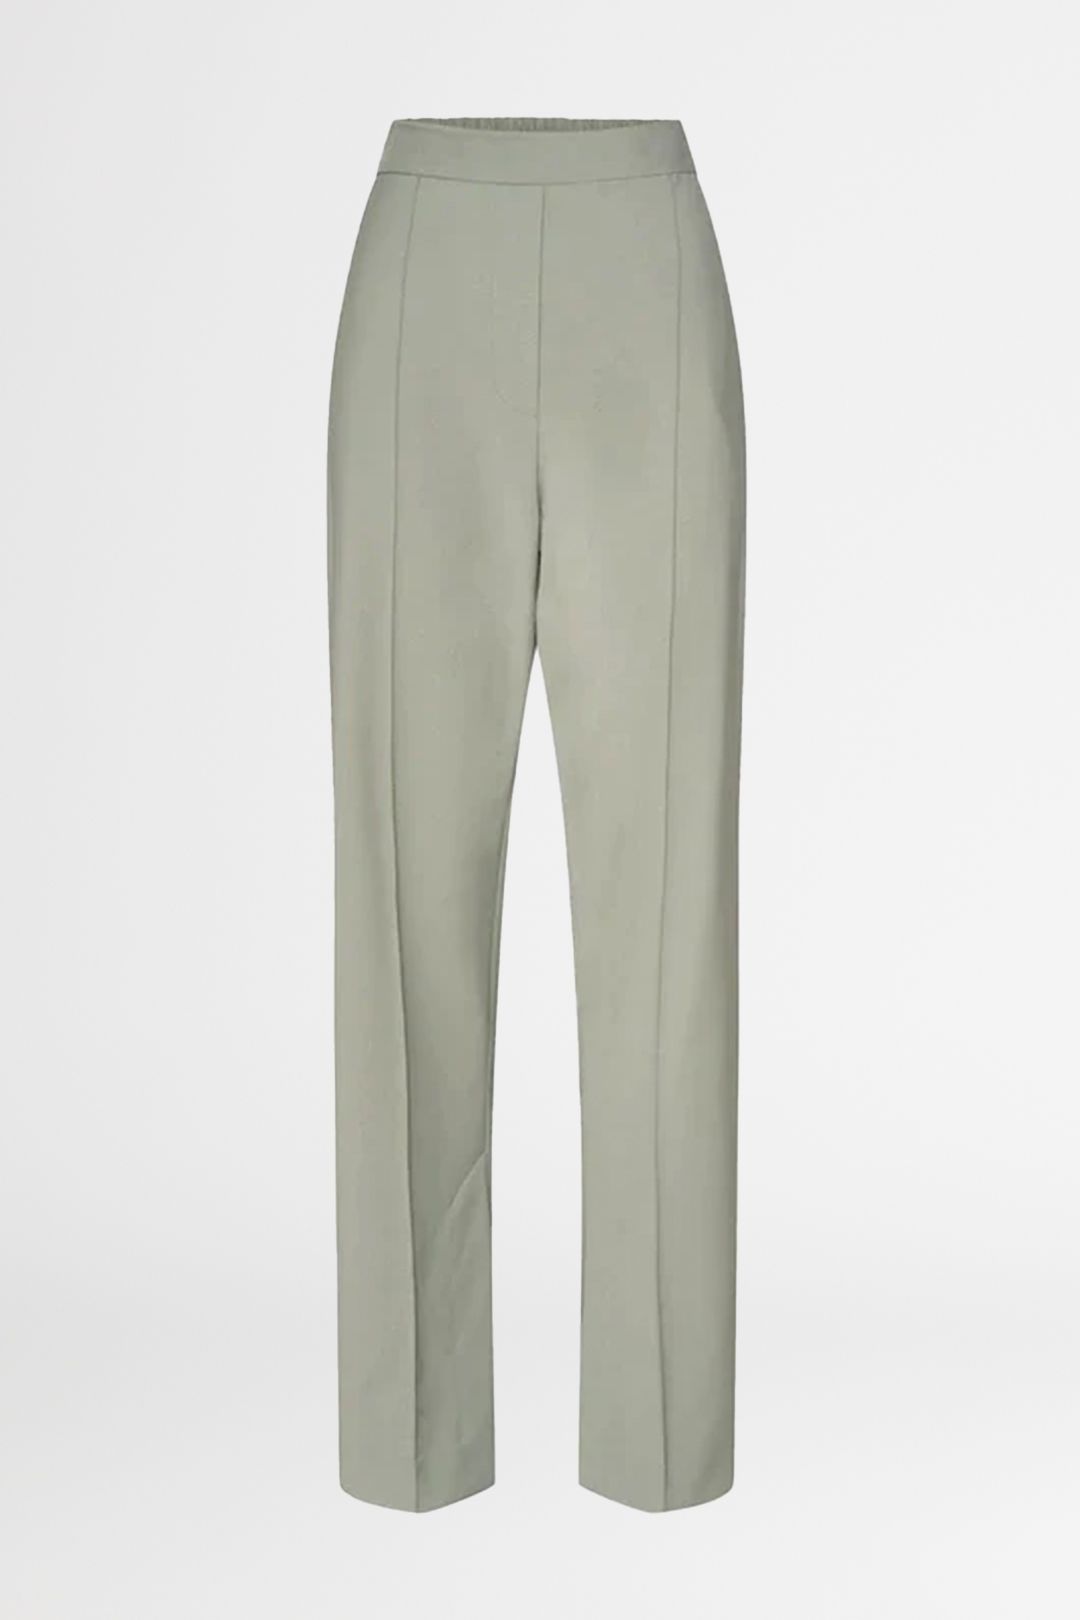 Camilla and Marc Aston Trouser Dusty Jade